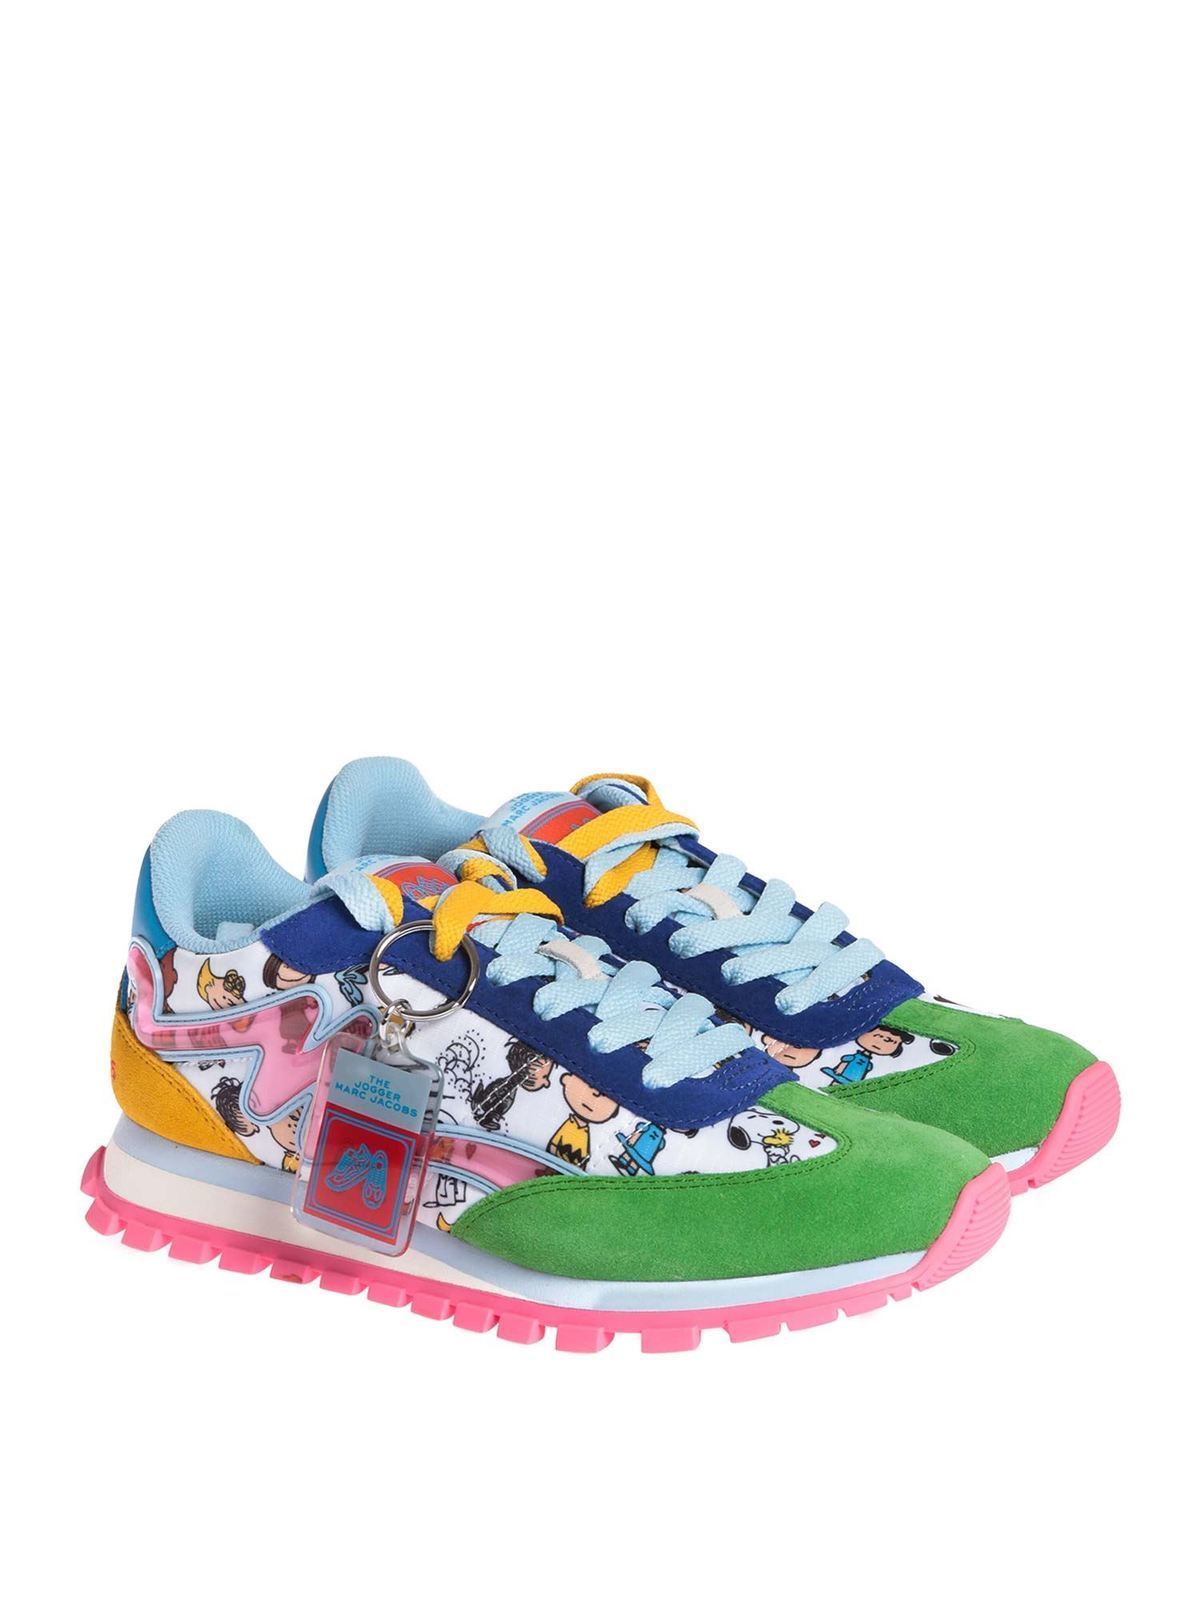 Trainers Marc Jacobs - The Comics Jogger sneakers - M9002317101